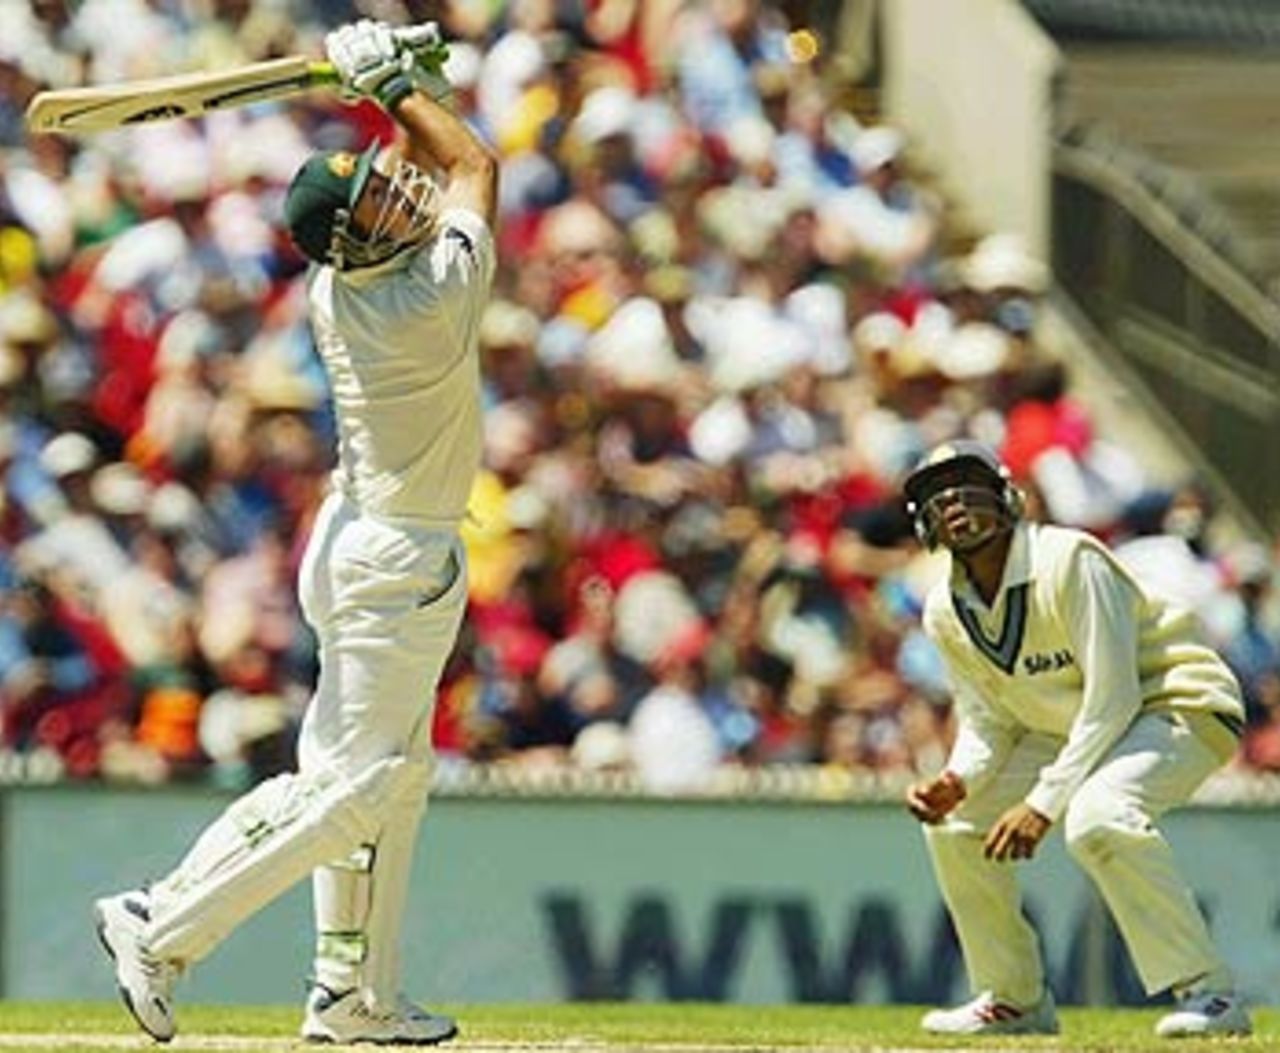 Look Akash, a bird. Ricky Ponting skies a ball as Akash Chopra looks on, 3rd Test, Melbourne, 2nd day, December 27, 2003